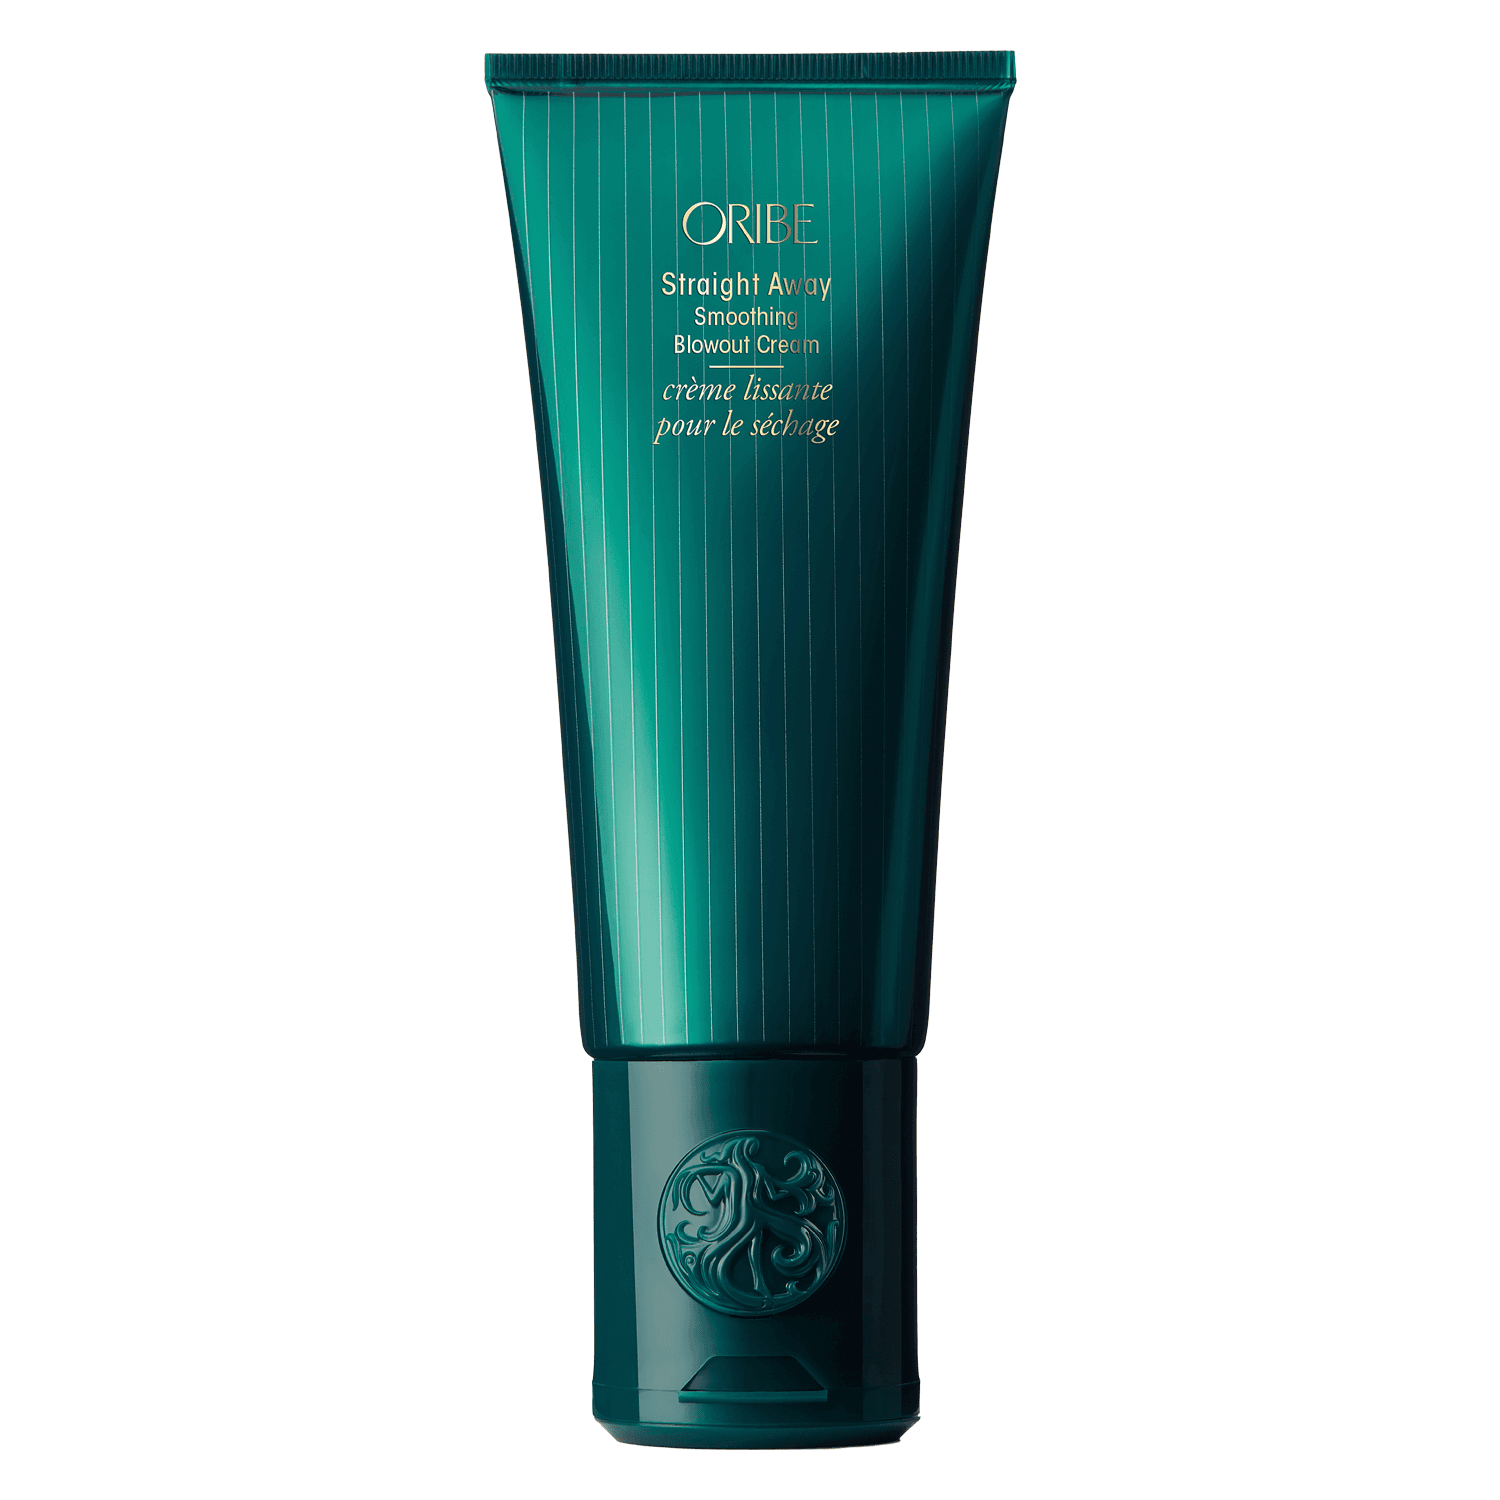 Oribe Care - Moisture & Control Straight Away Smoothing Blowout Cream